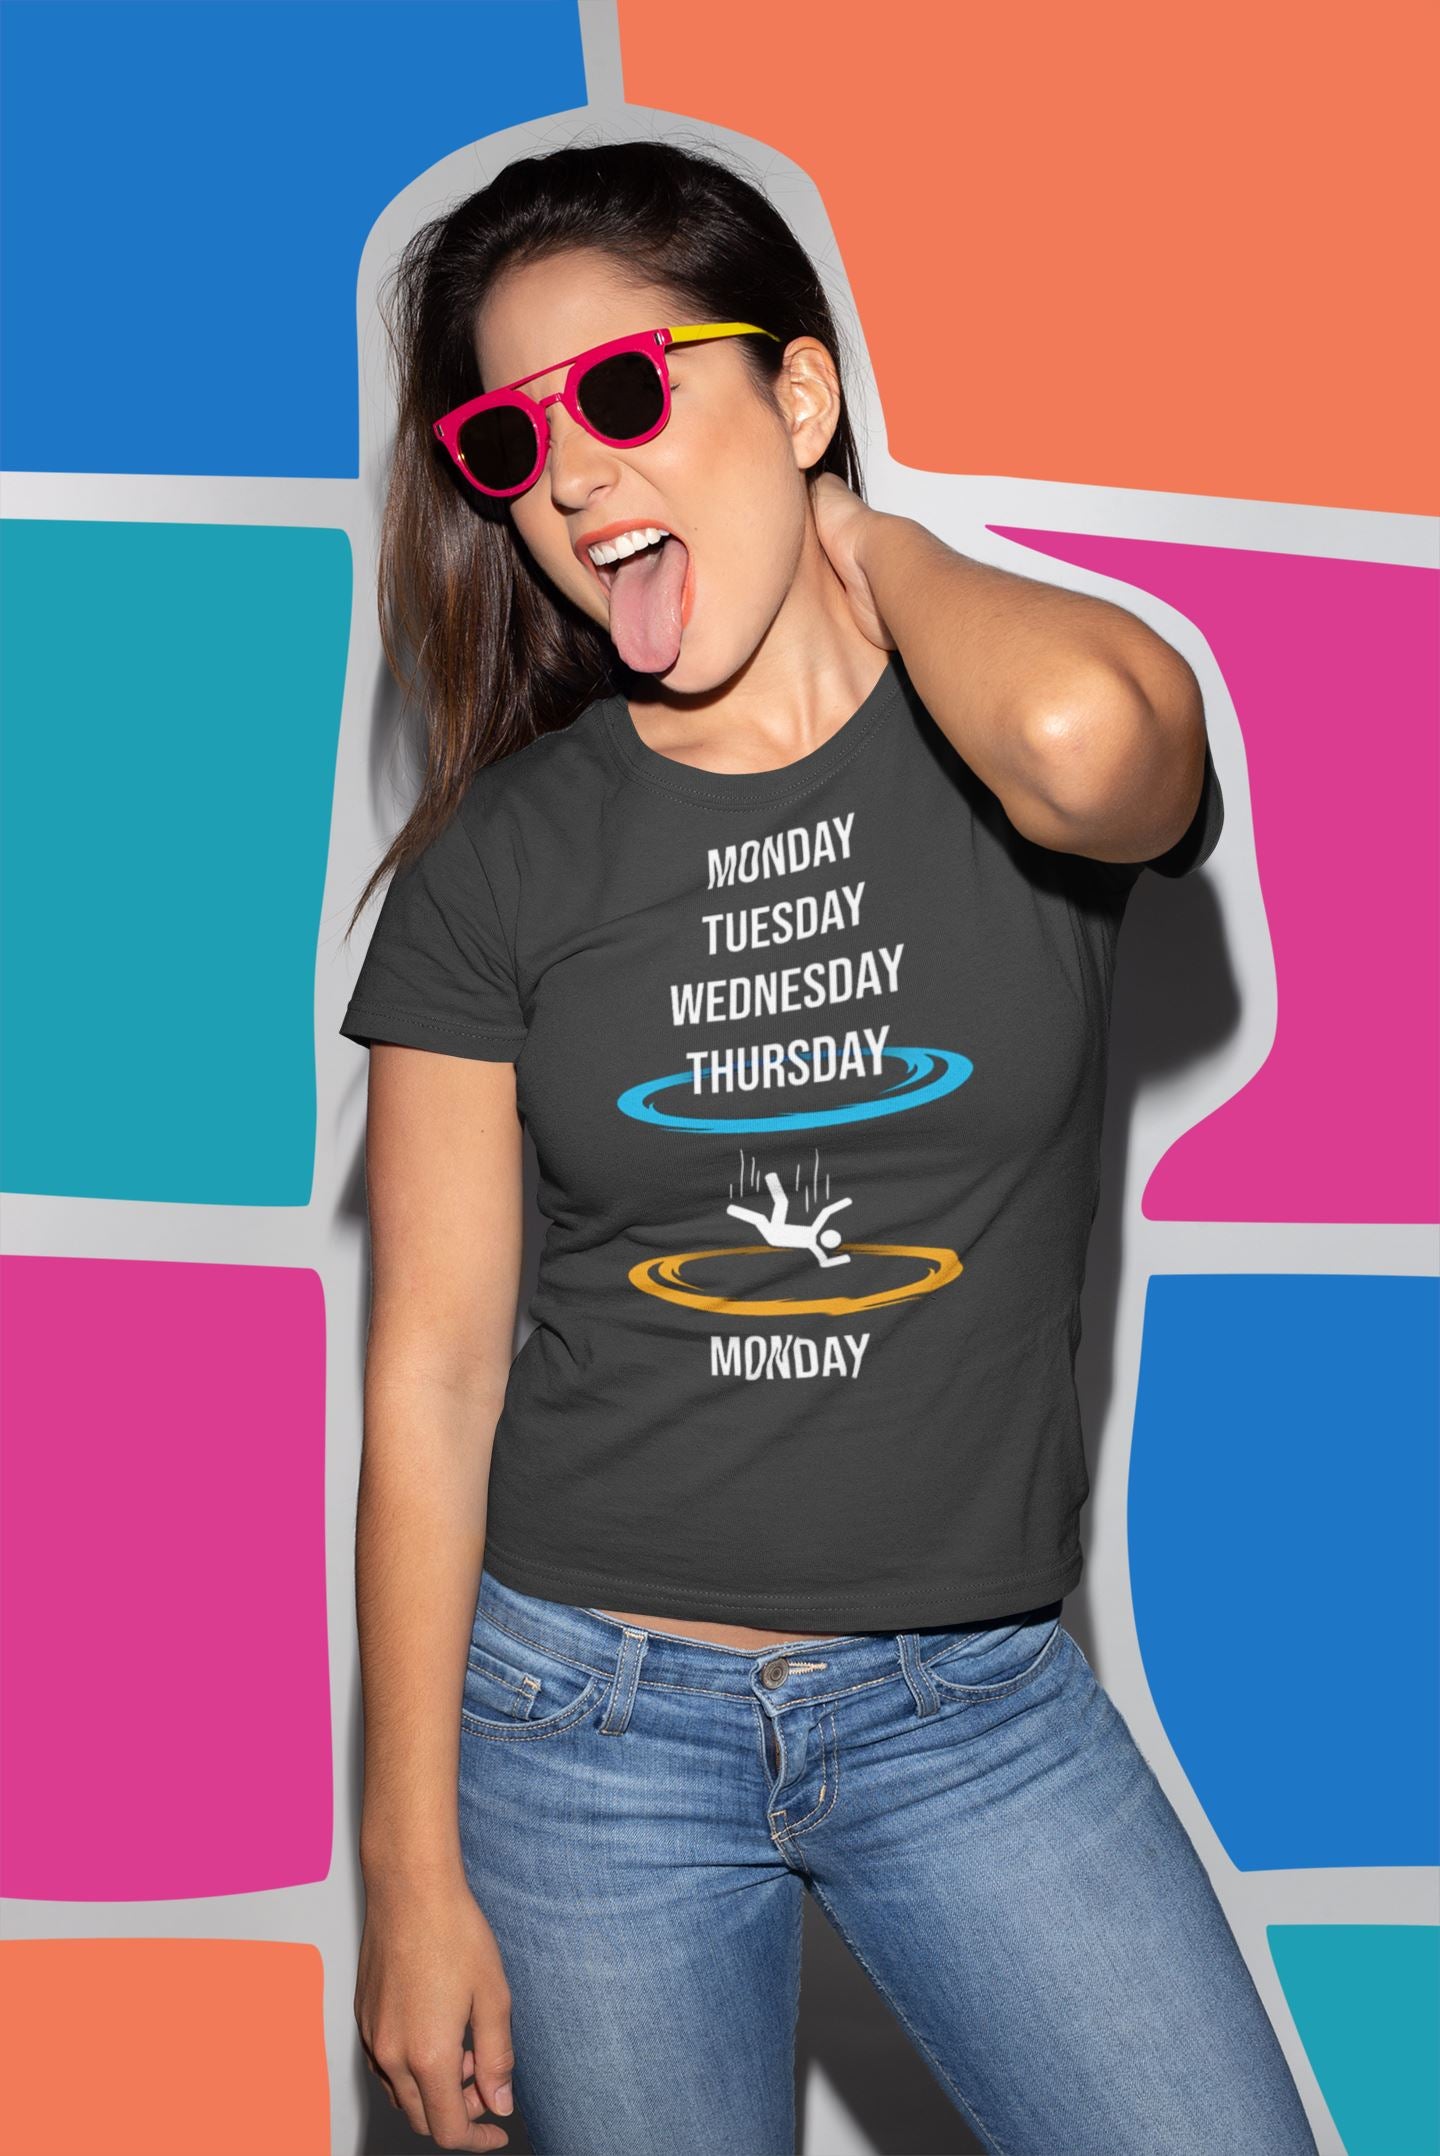 Monday to Monday Vortex Funny Black T Shirt for Men and Women freeshipping - Catch My Drift India